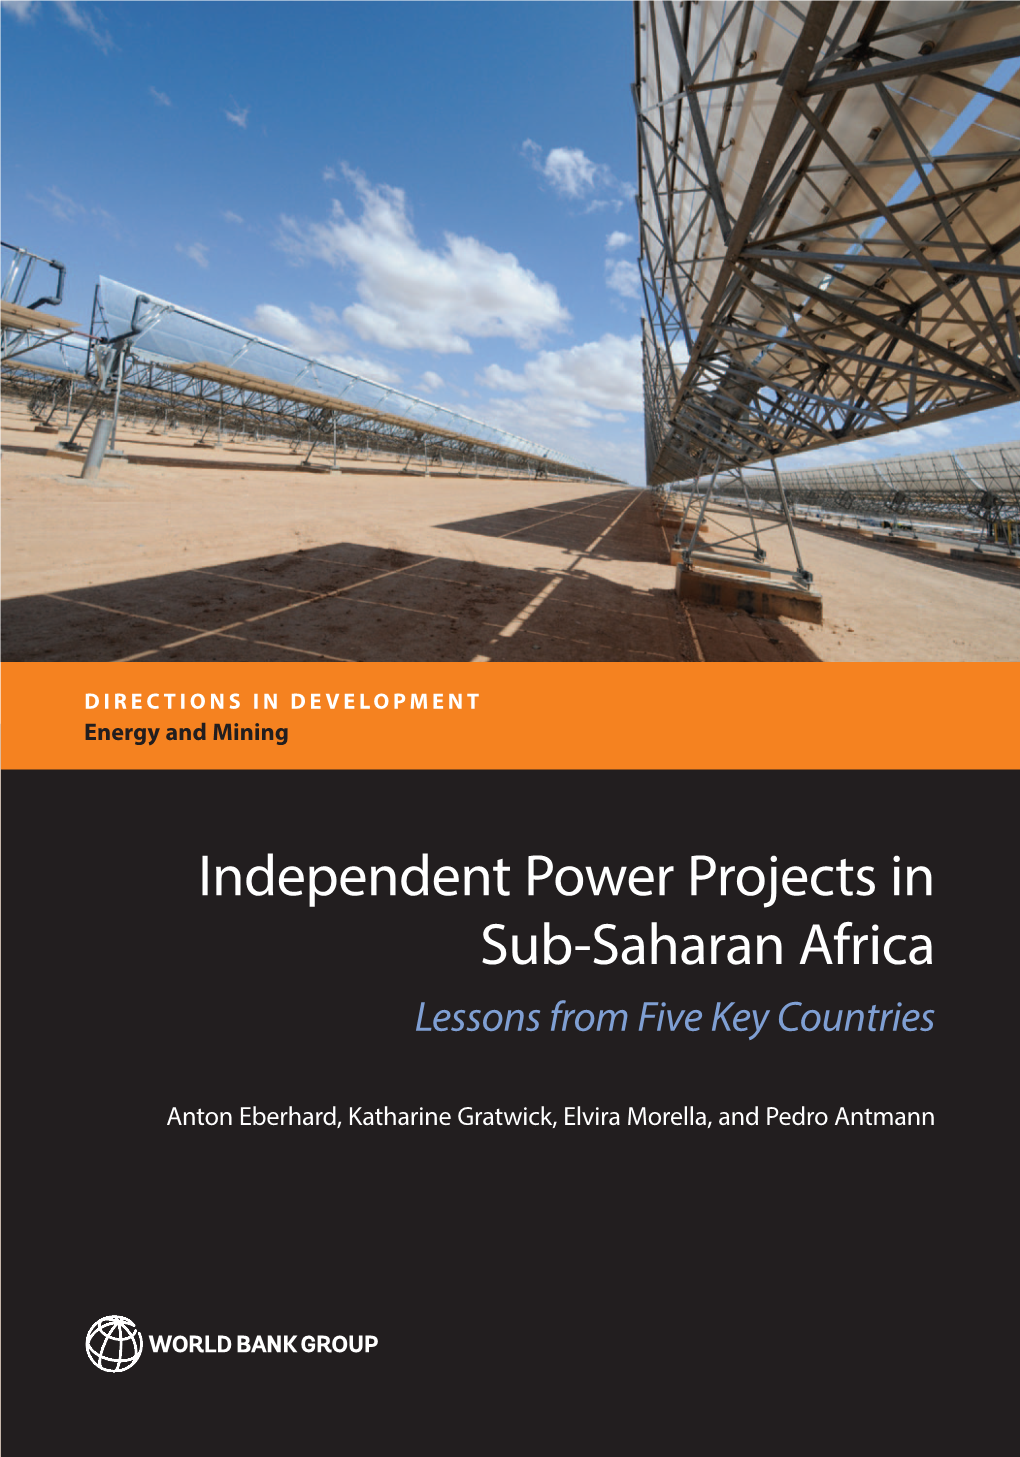 Independent Power Projects in Sub-Saharan Africa Eberhard, Gratwick, Morella, and Antmann